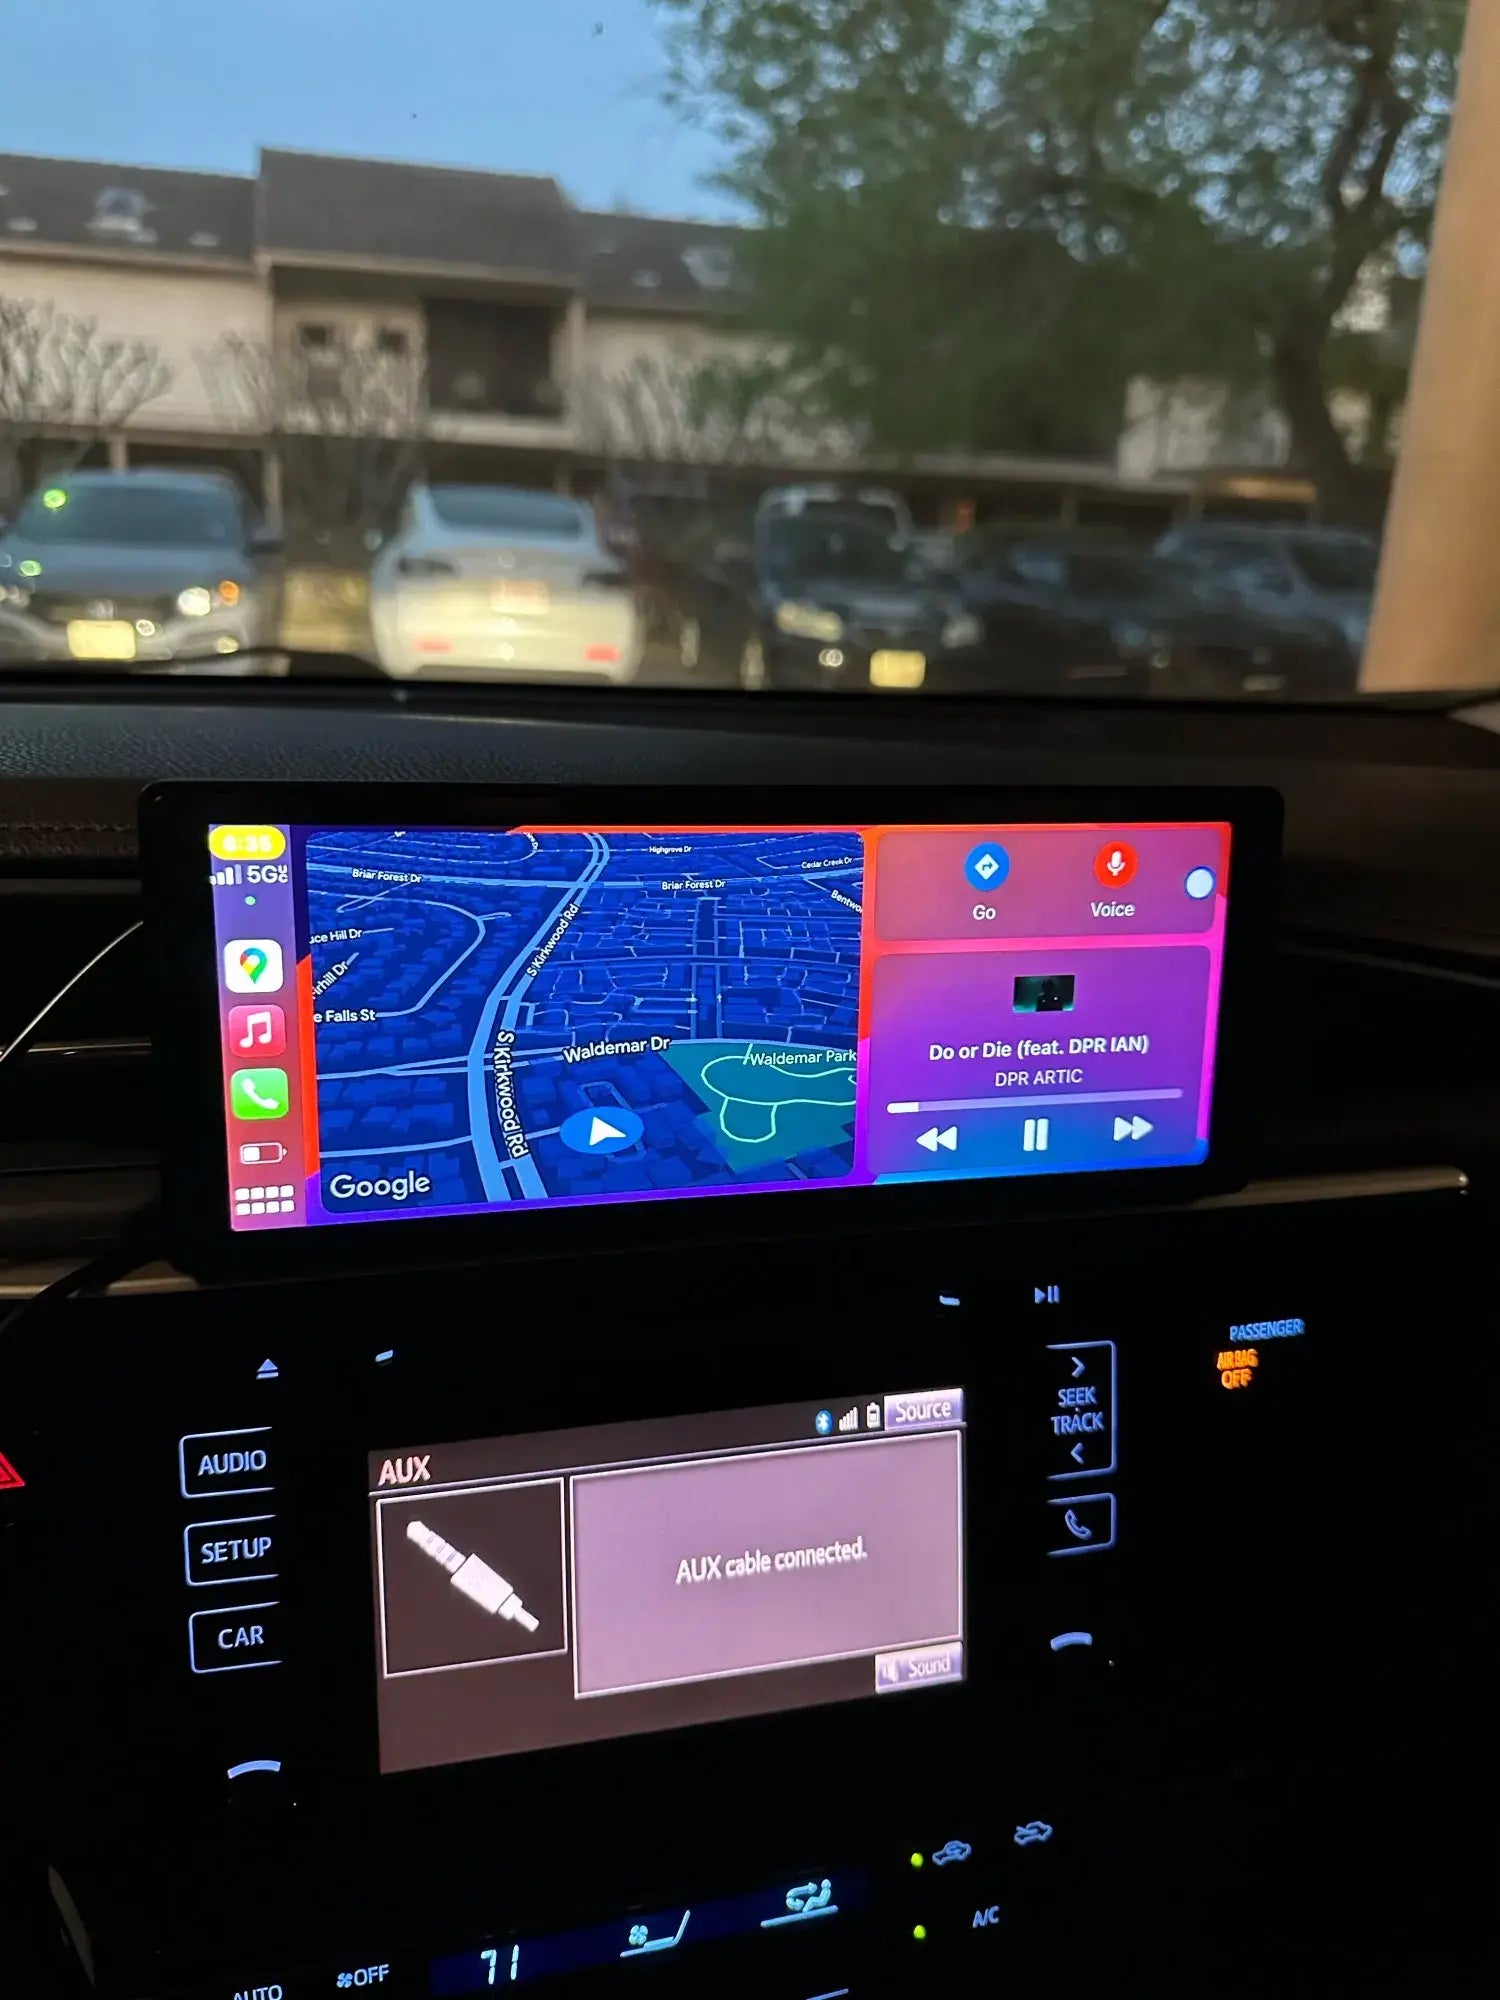 CarPlay screen showing a map and music player application above a car's built-in audio system display, captured during twilight hours